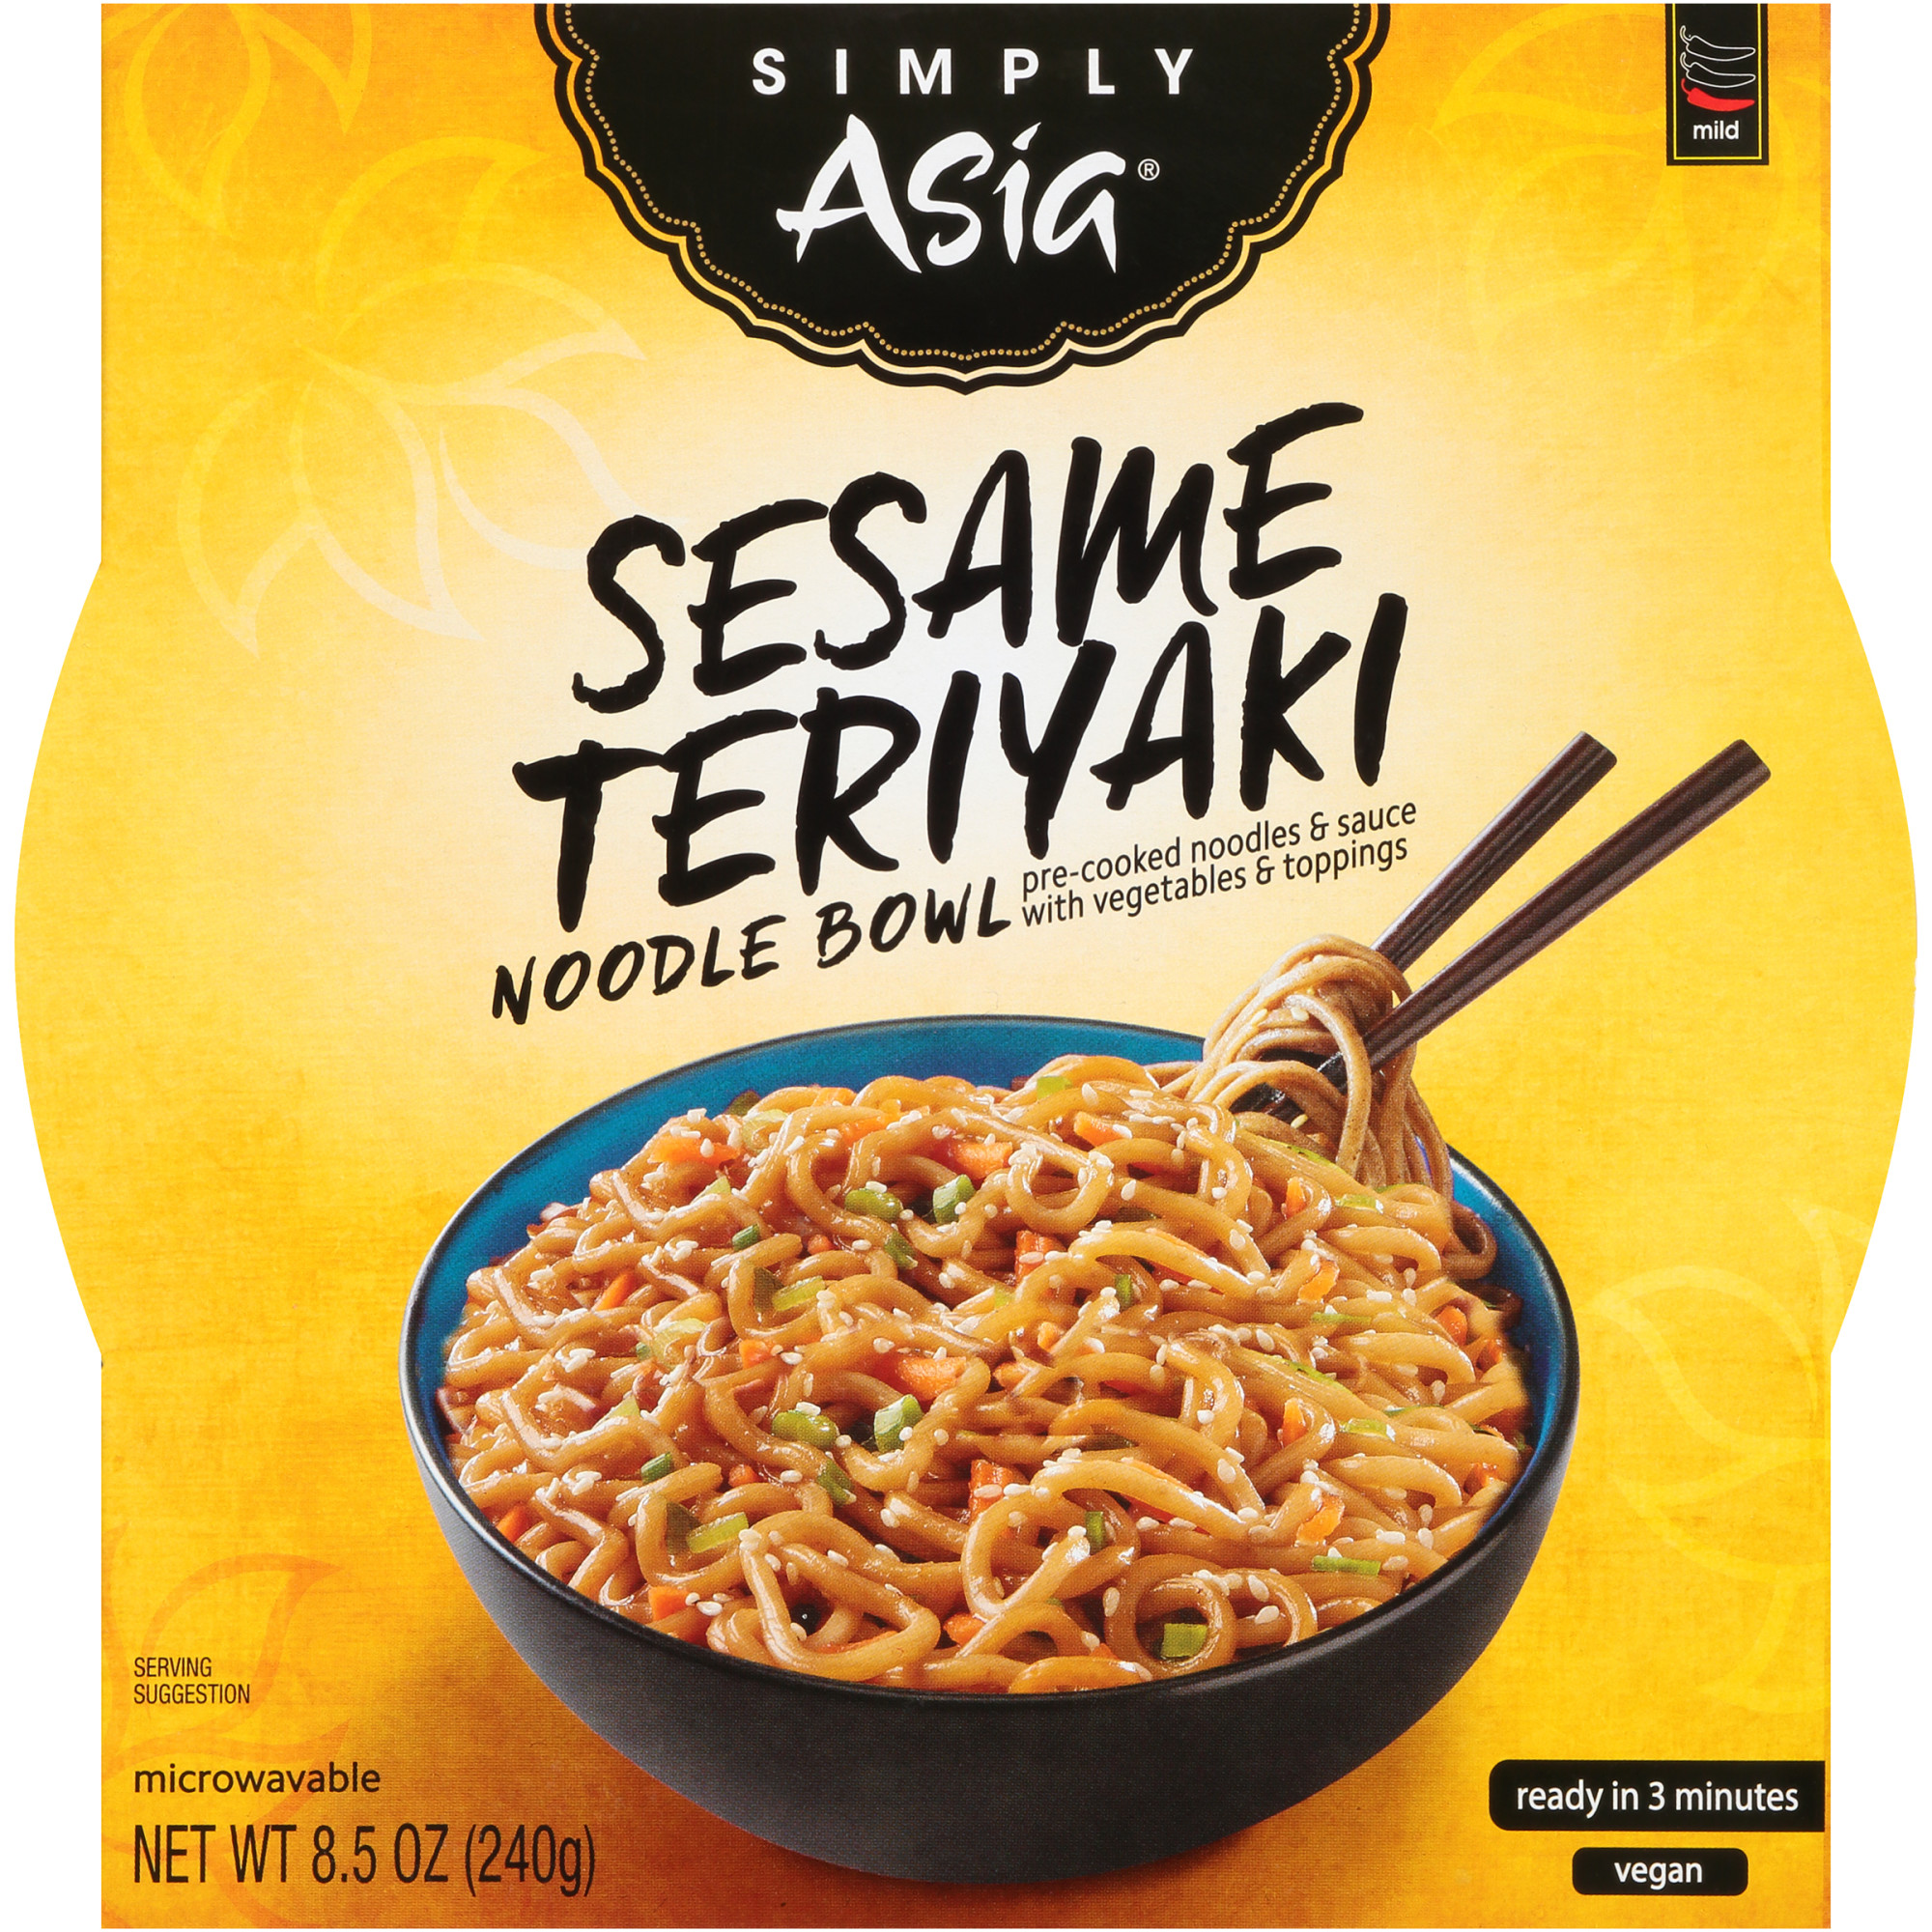 Simply Asia Sesame Teriyaki Noodle Bowl, 8.5 ounce Noodles - image 1 of 11